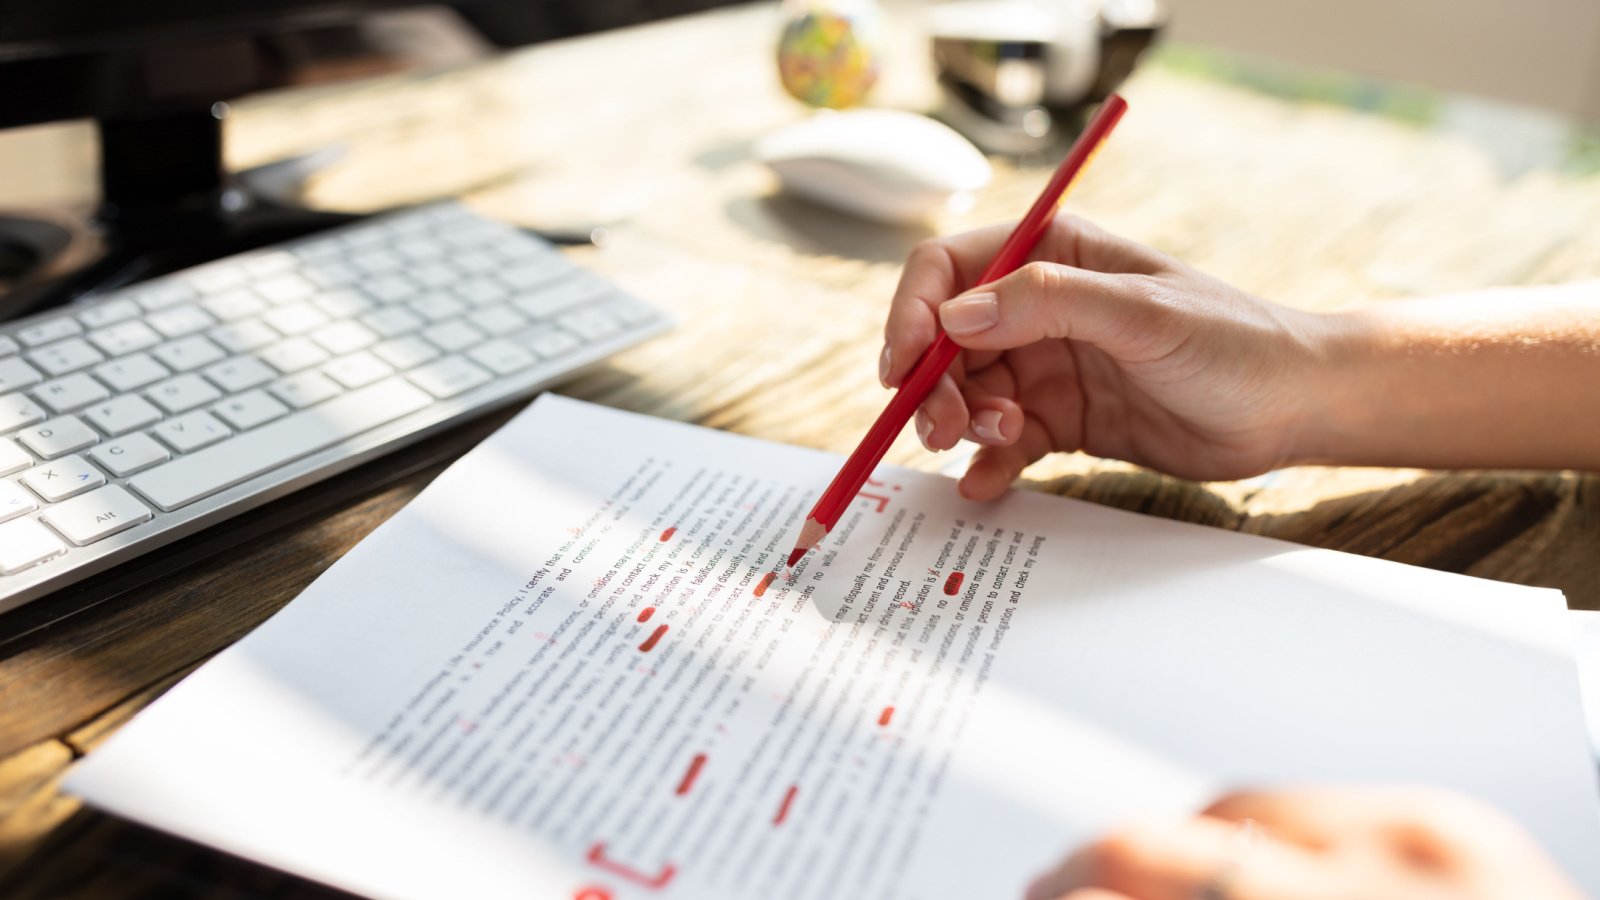 <p>Do you notice all the grammar and punctuation mistakes that show up in your inbox every day? If so, proofreading on the side might suit you well.</p><p>A love of reading and an appreciation for the <a href="https://www.kindafrugal.com/celebrating-12-of-our-favorite-female-writers/">written word</a> is vital if you want to start a proofreading business. You’ll need excellent spelling, grammar, and punctuation skills, too.</p><p>If making money reading books and other written materials sounds like your cup of tea, check out freelance platforms like Upwork, Freelancer, and PeoplePerHour. Freelance proofreaders routinely charge $30 an hour or more for their work.</p>